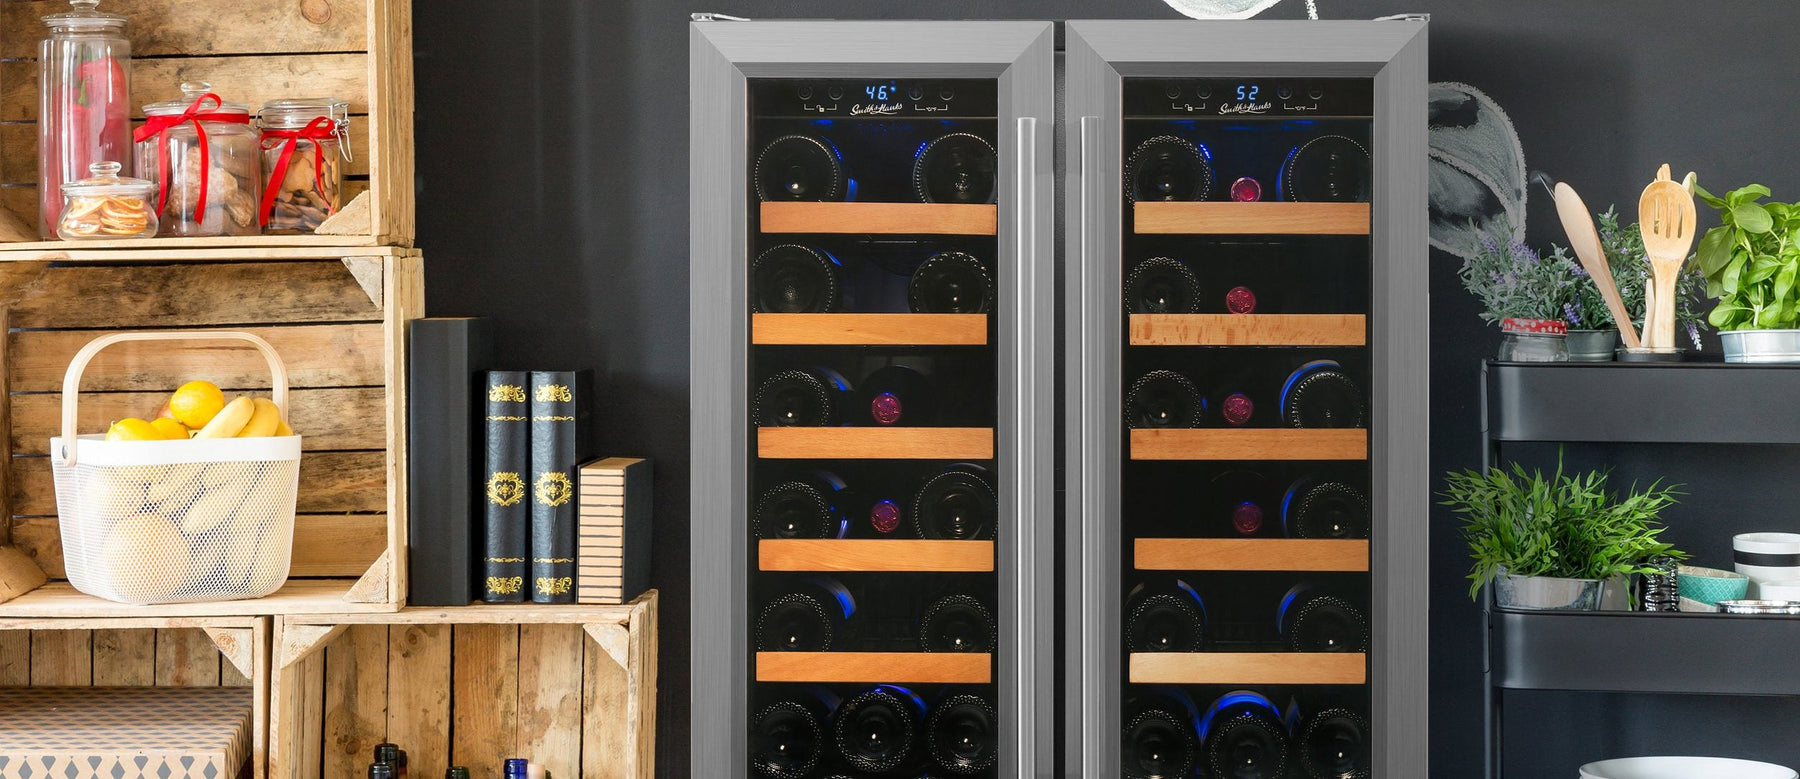 The Ultimate Wine Cooler Buying Guide: How to Pick the Perfect Wine Fridge - ChillCooler